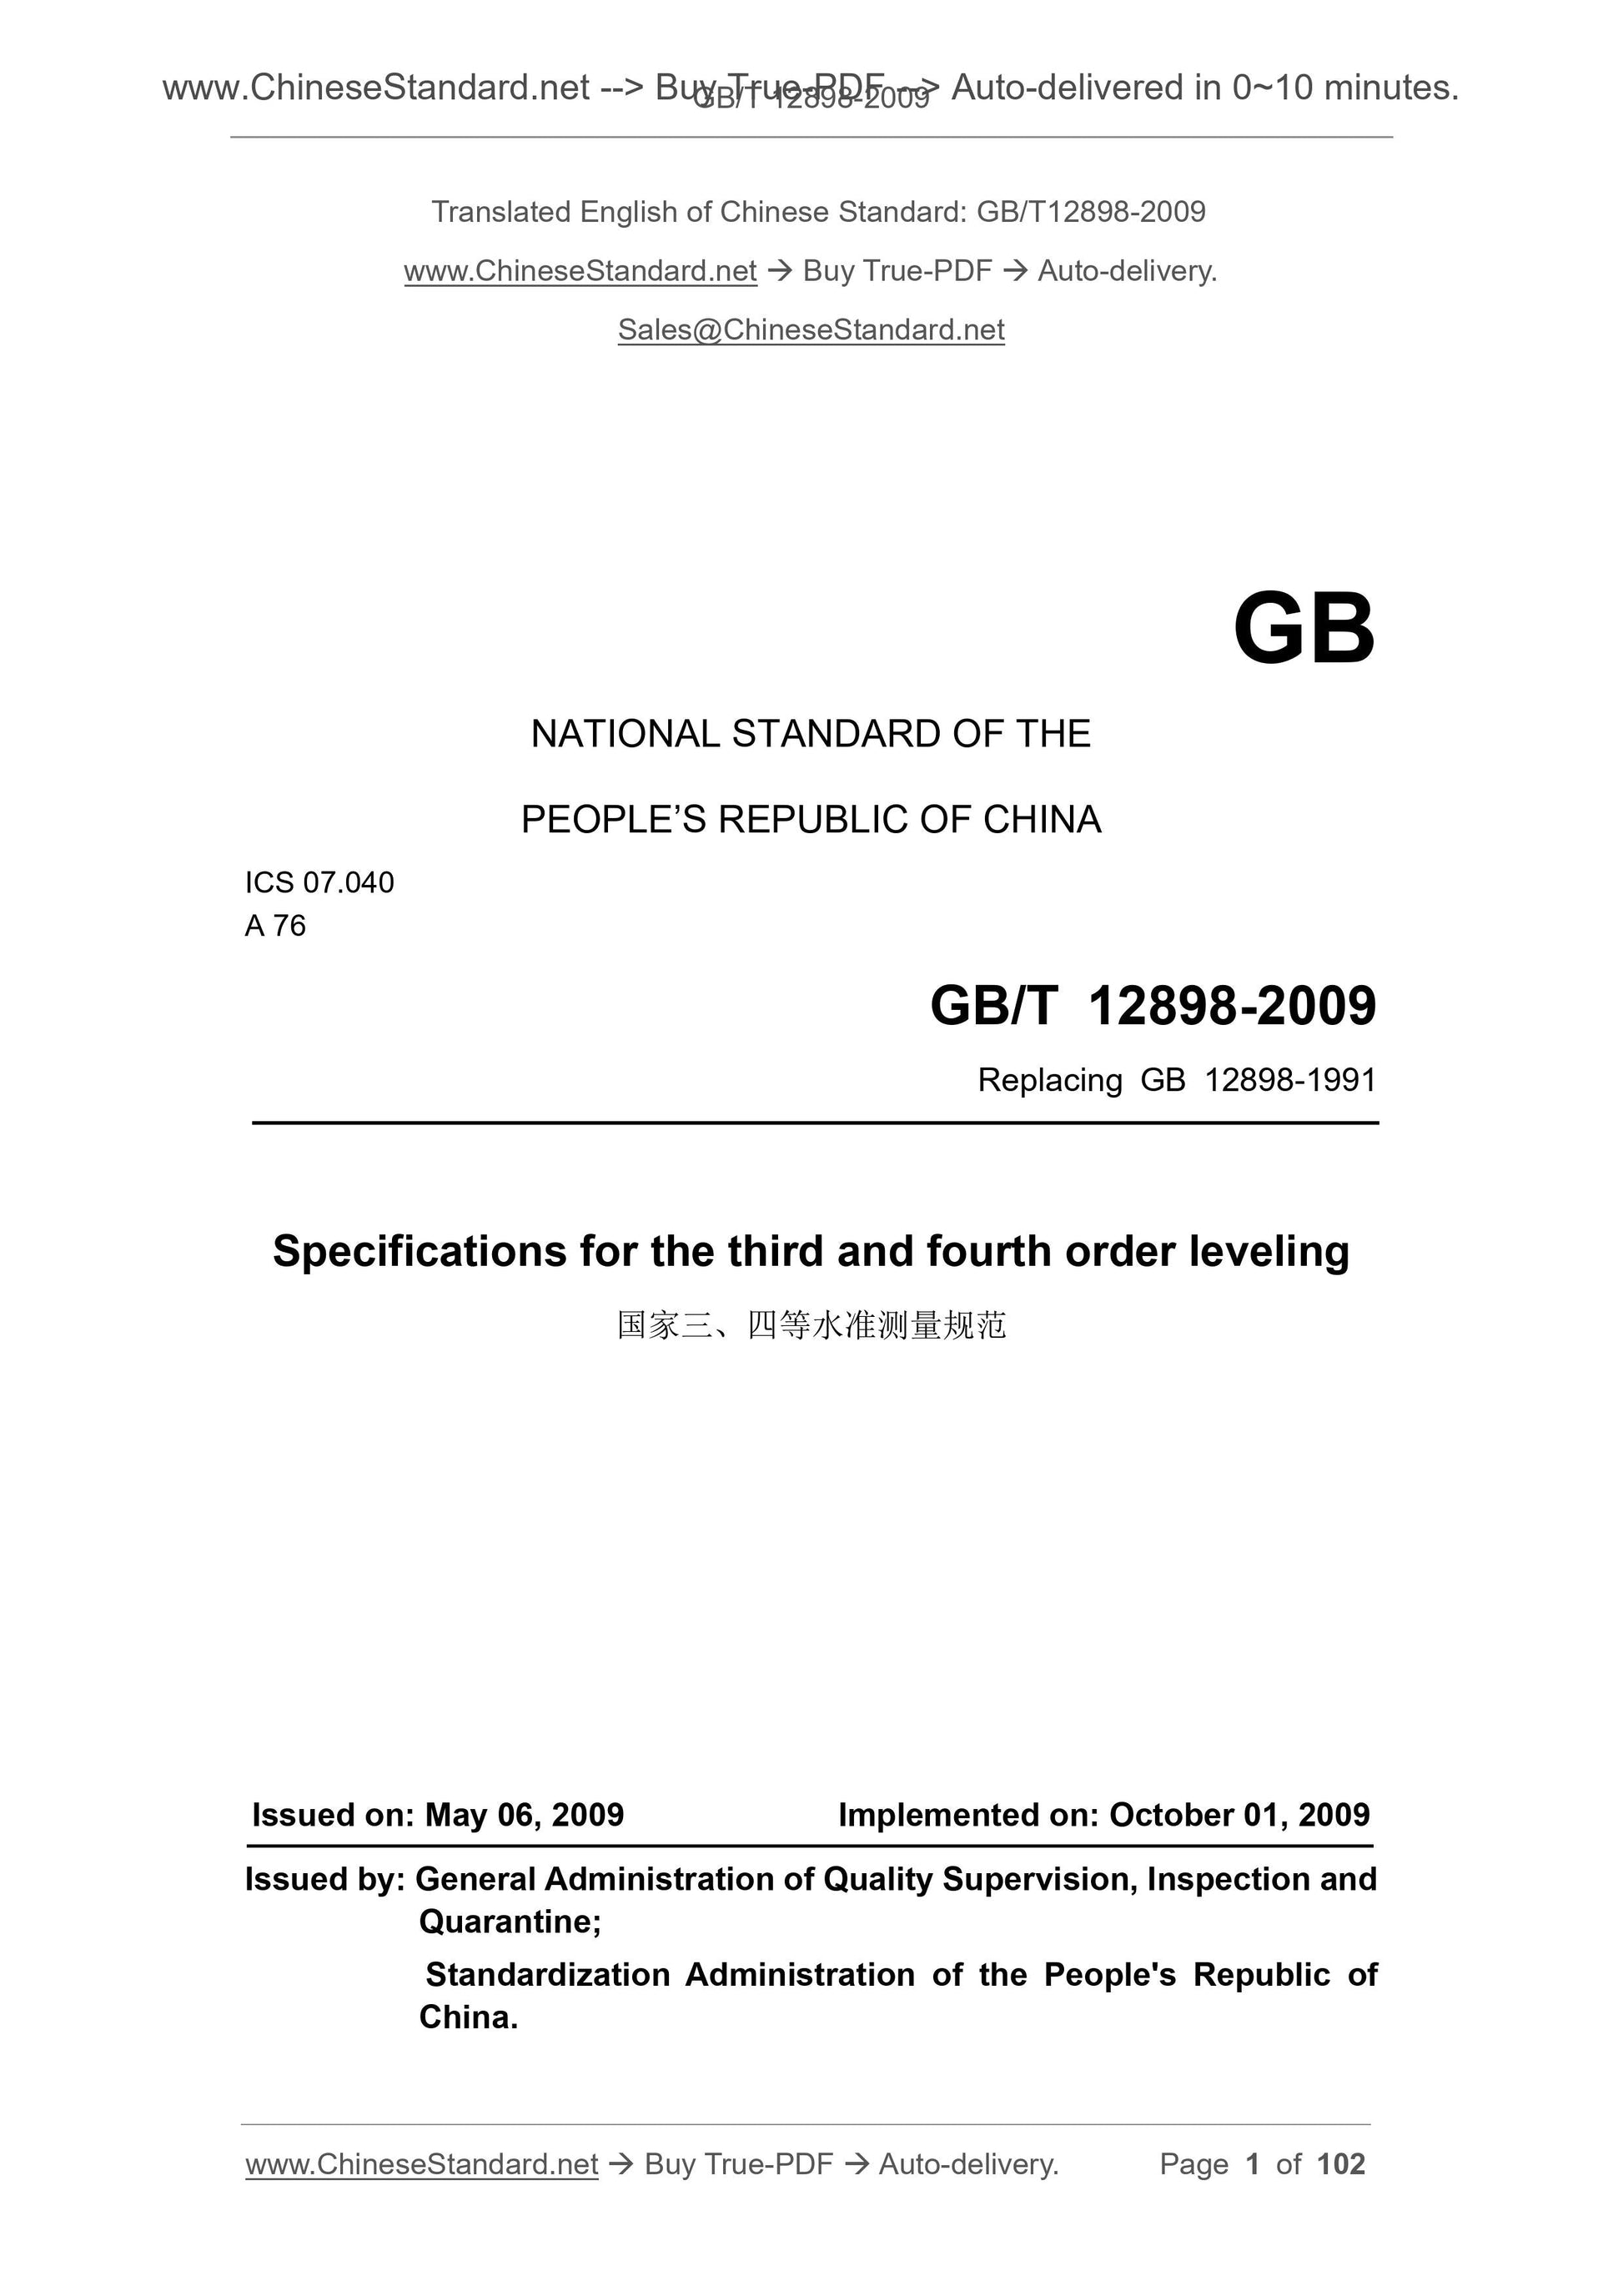 GB/T 12898-2009 Page 1